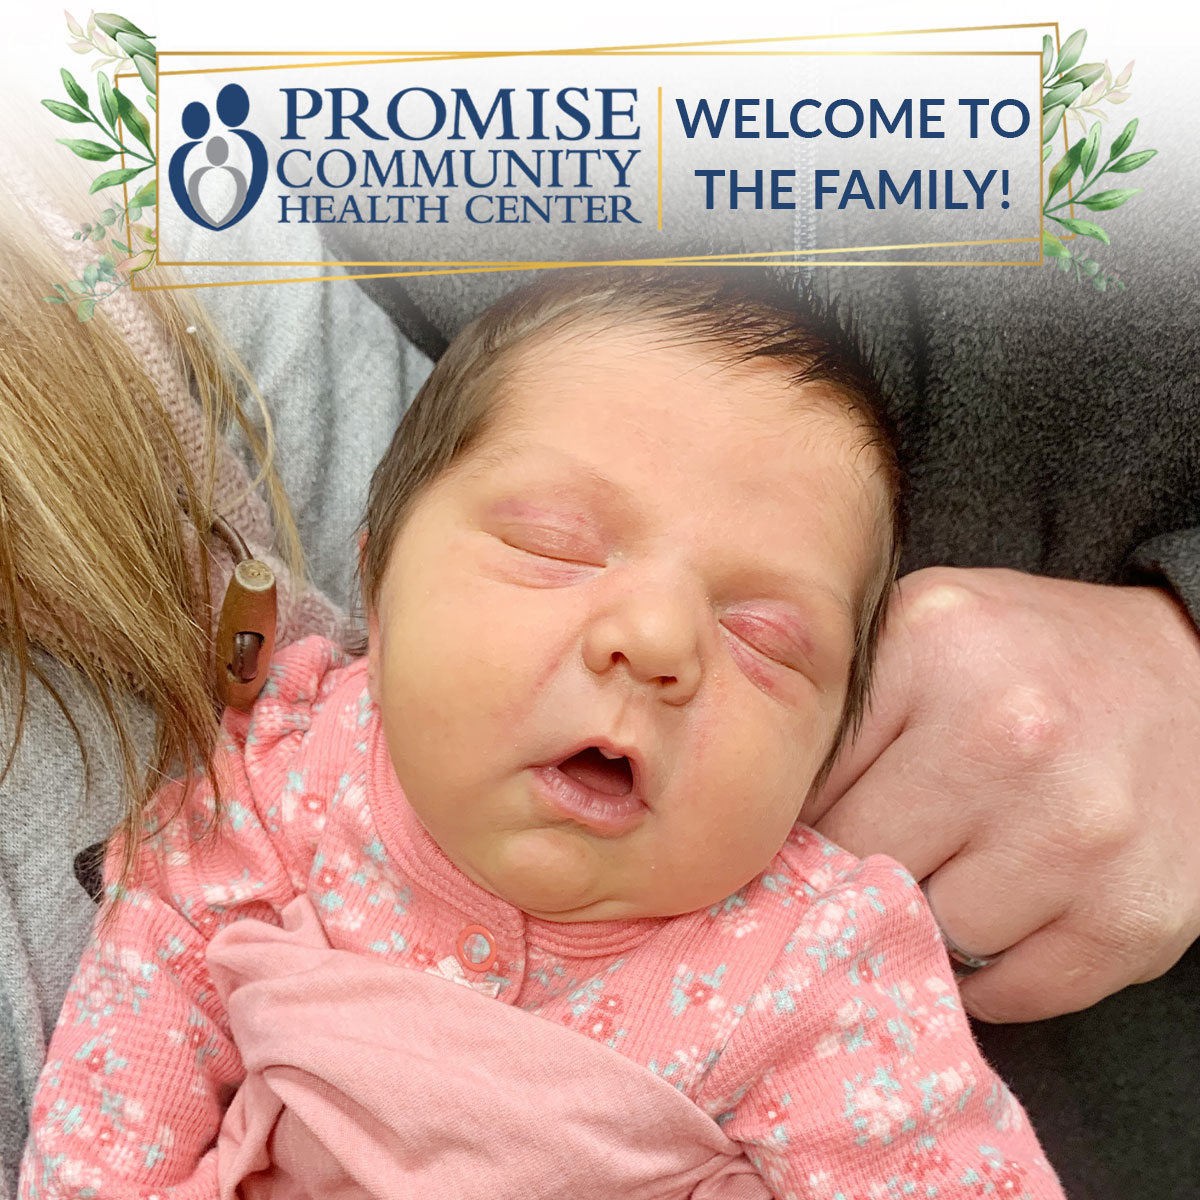 Zomer Family | Promise Community Health Center in Sioux Center, Iowa | Home births in northwest Iowa, Home births in southeast South Dakota, Home births in southwest Minnesota | Home births in Sioux Falls South Dakota, Home births in Beresford South Dakota, Home births in Sioux City IA, Home births in LeMars IA, Home births in Worthington MN, Home births in Iowa, Home births in South Dakota, Home births in Minnesota